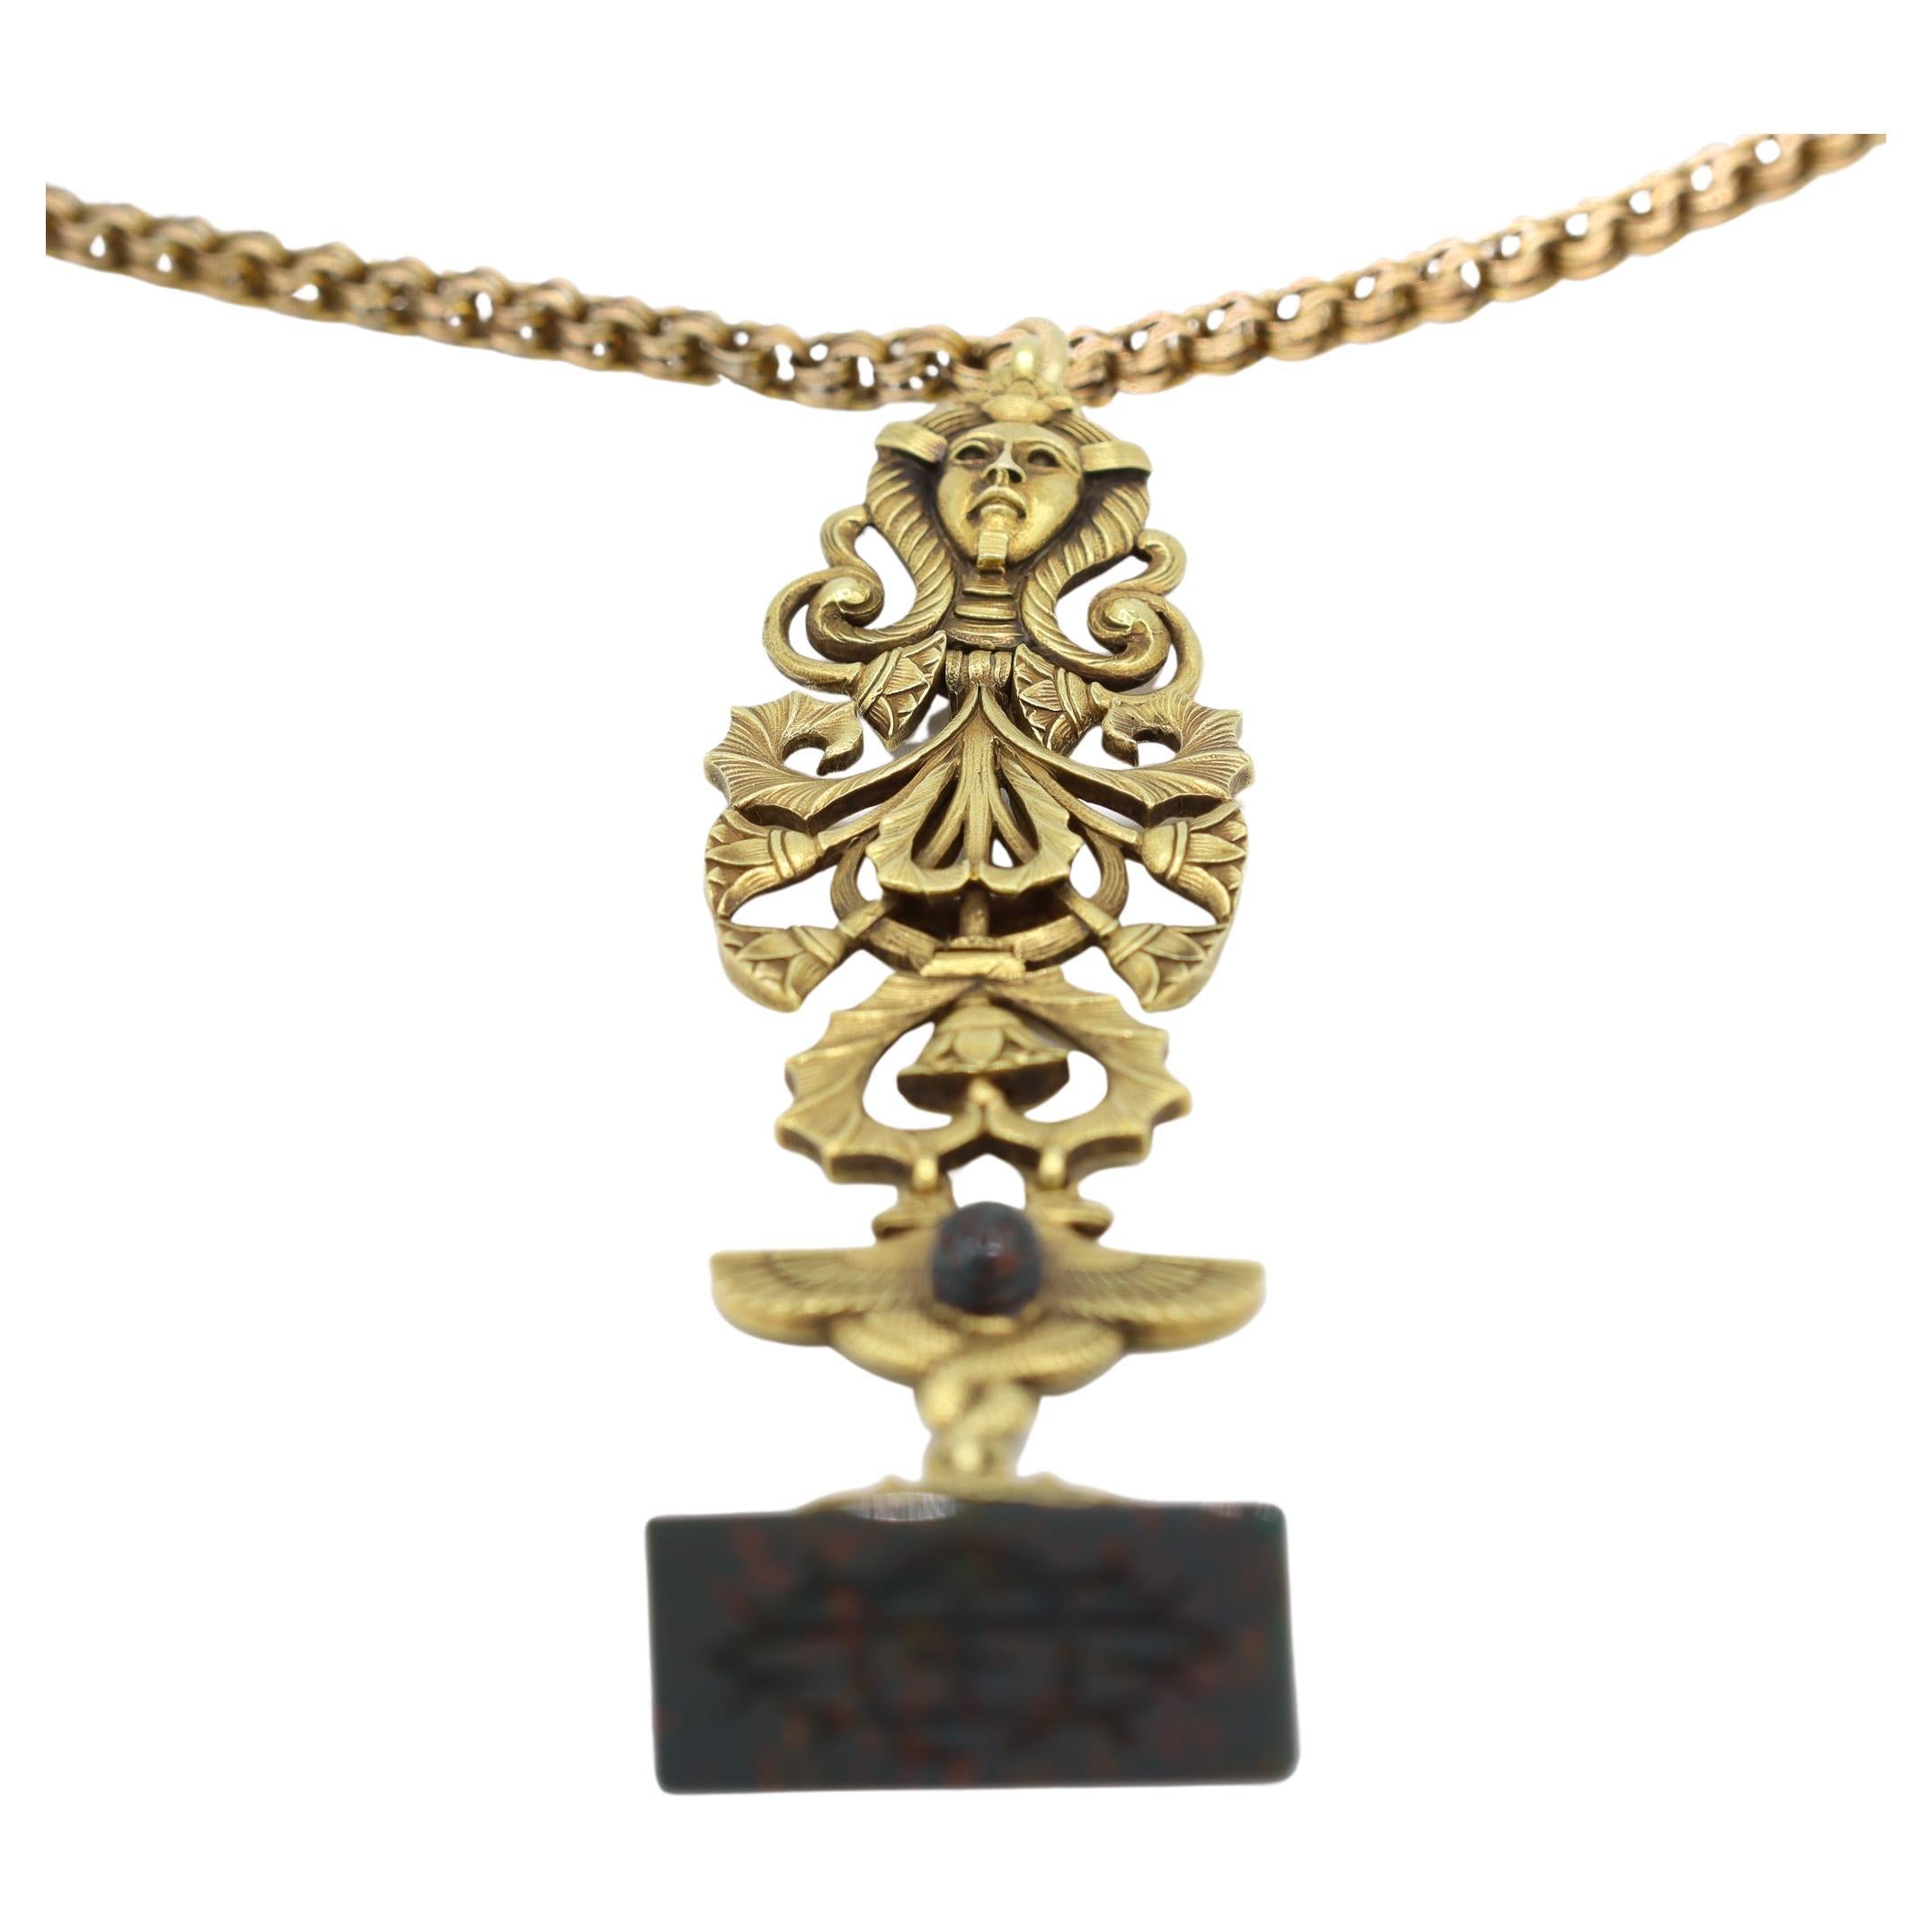 Gender: Ladies

Metal Type: 21K Yellow Gold 

Pendant Length: 4.50 inches

Chain Length: 21.00 inches

Chain Width 3.80 mm

Width: 25.50 mm

Pendant Weight: 36.80 grams

Chain Weight: 11.40 grams

One ladies 21K yellow gold heliotrope victorian